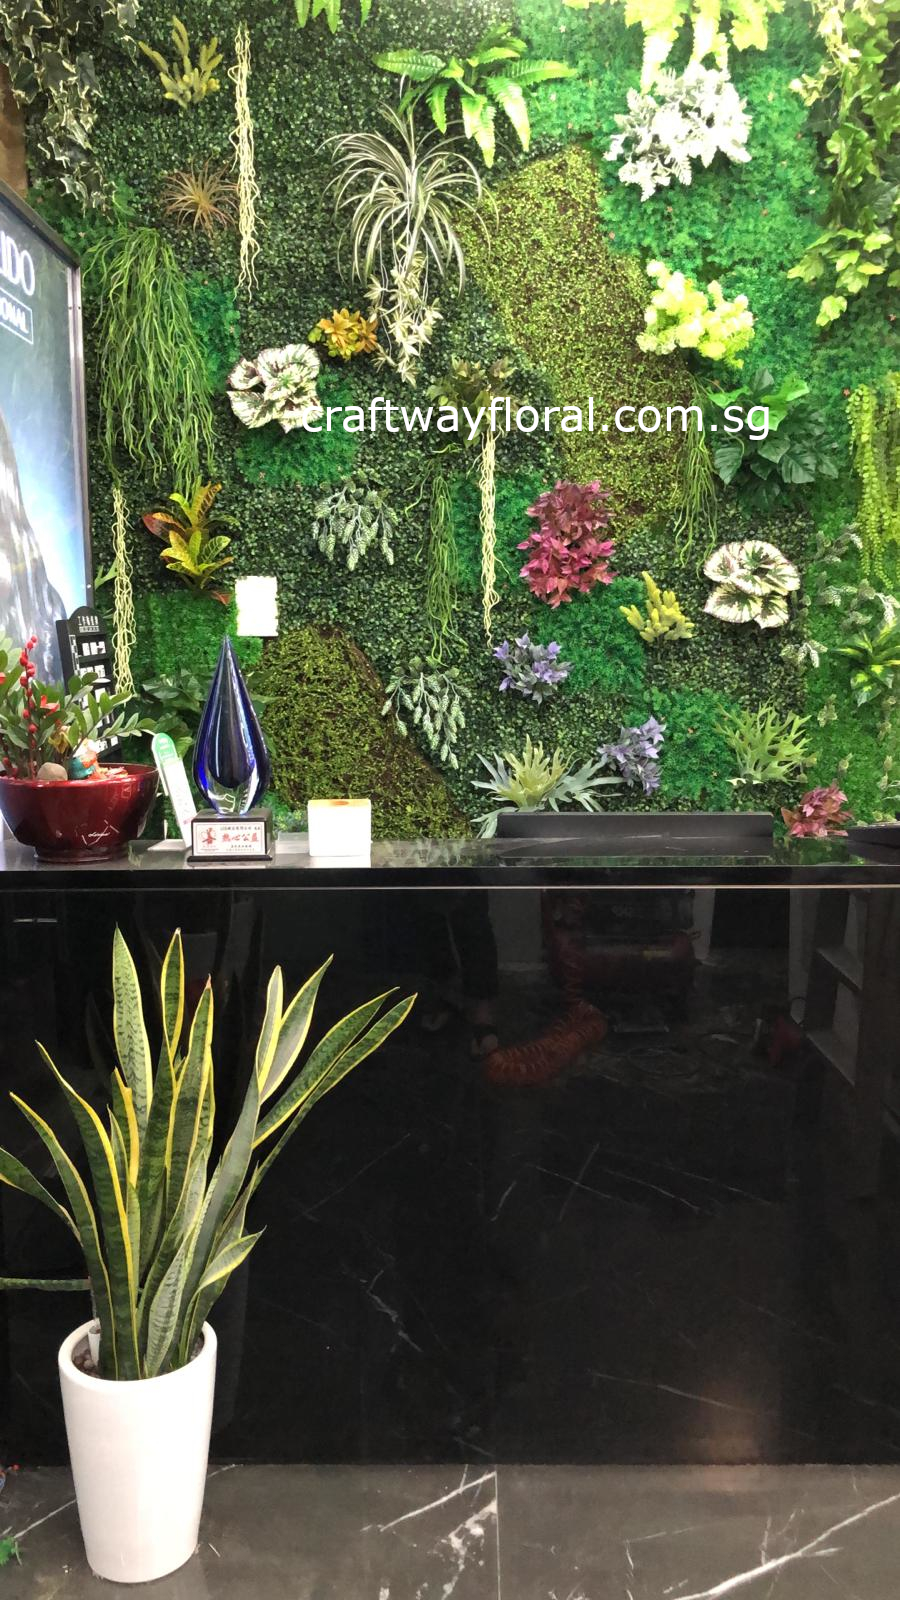 Craftway Floral & Gifts